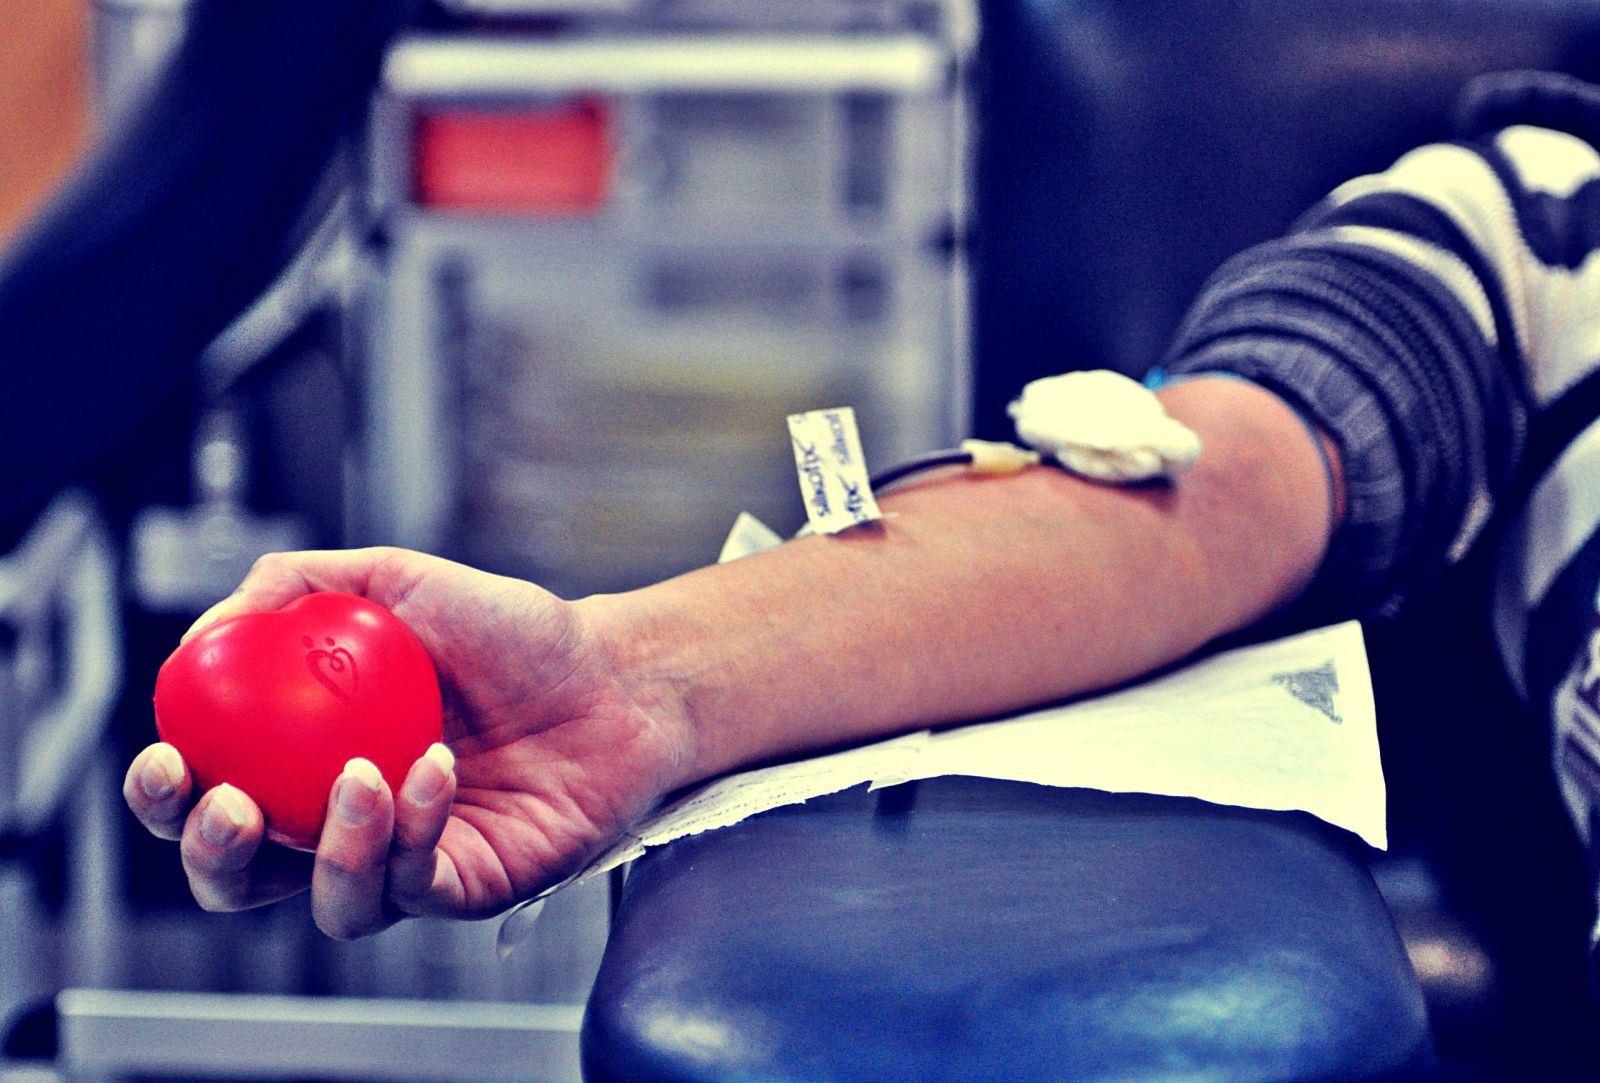 Blood donation, a measure to save more lives